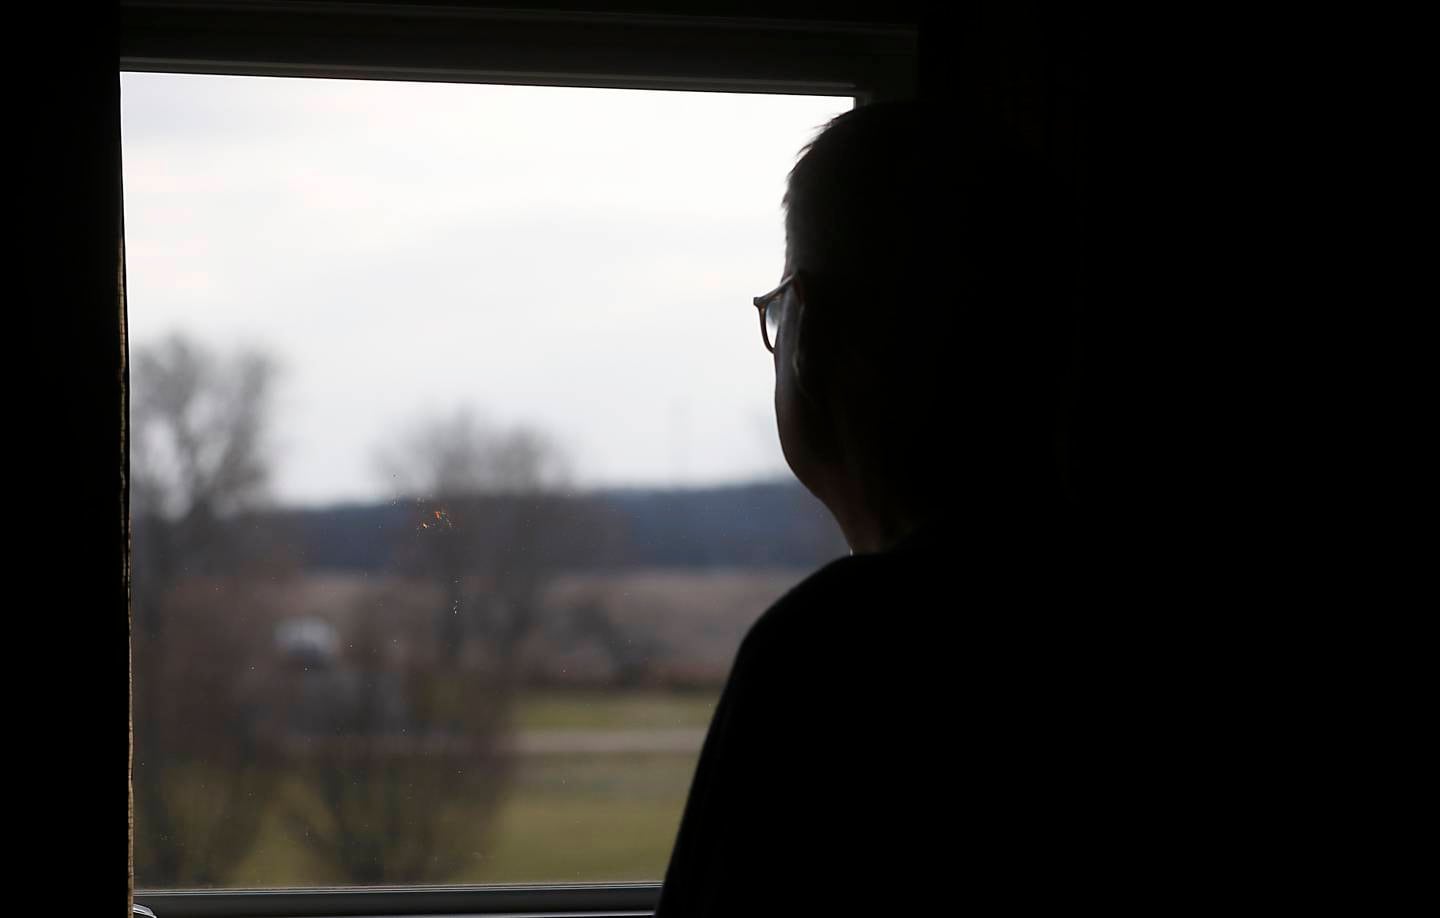 Ron Bryant looks out of his office window at a farm field Monday, Nov. 28, 2022, from their home at 8219 Country Shire Lane in Fox Lake. The land was purchased by Super Aggregates to develop into a gravel pit, an idea the Bryants and their neighbors oppose.